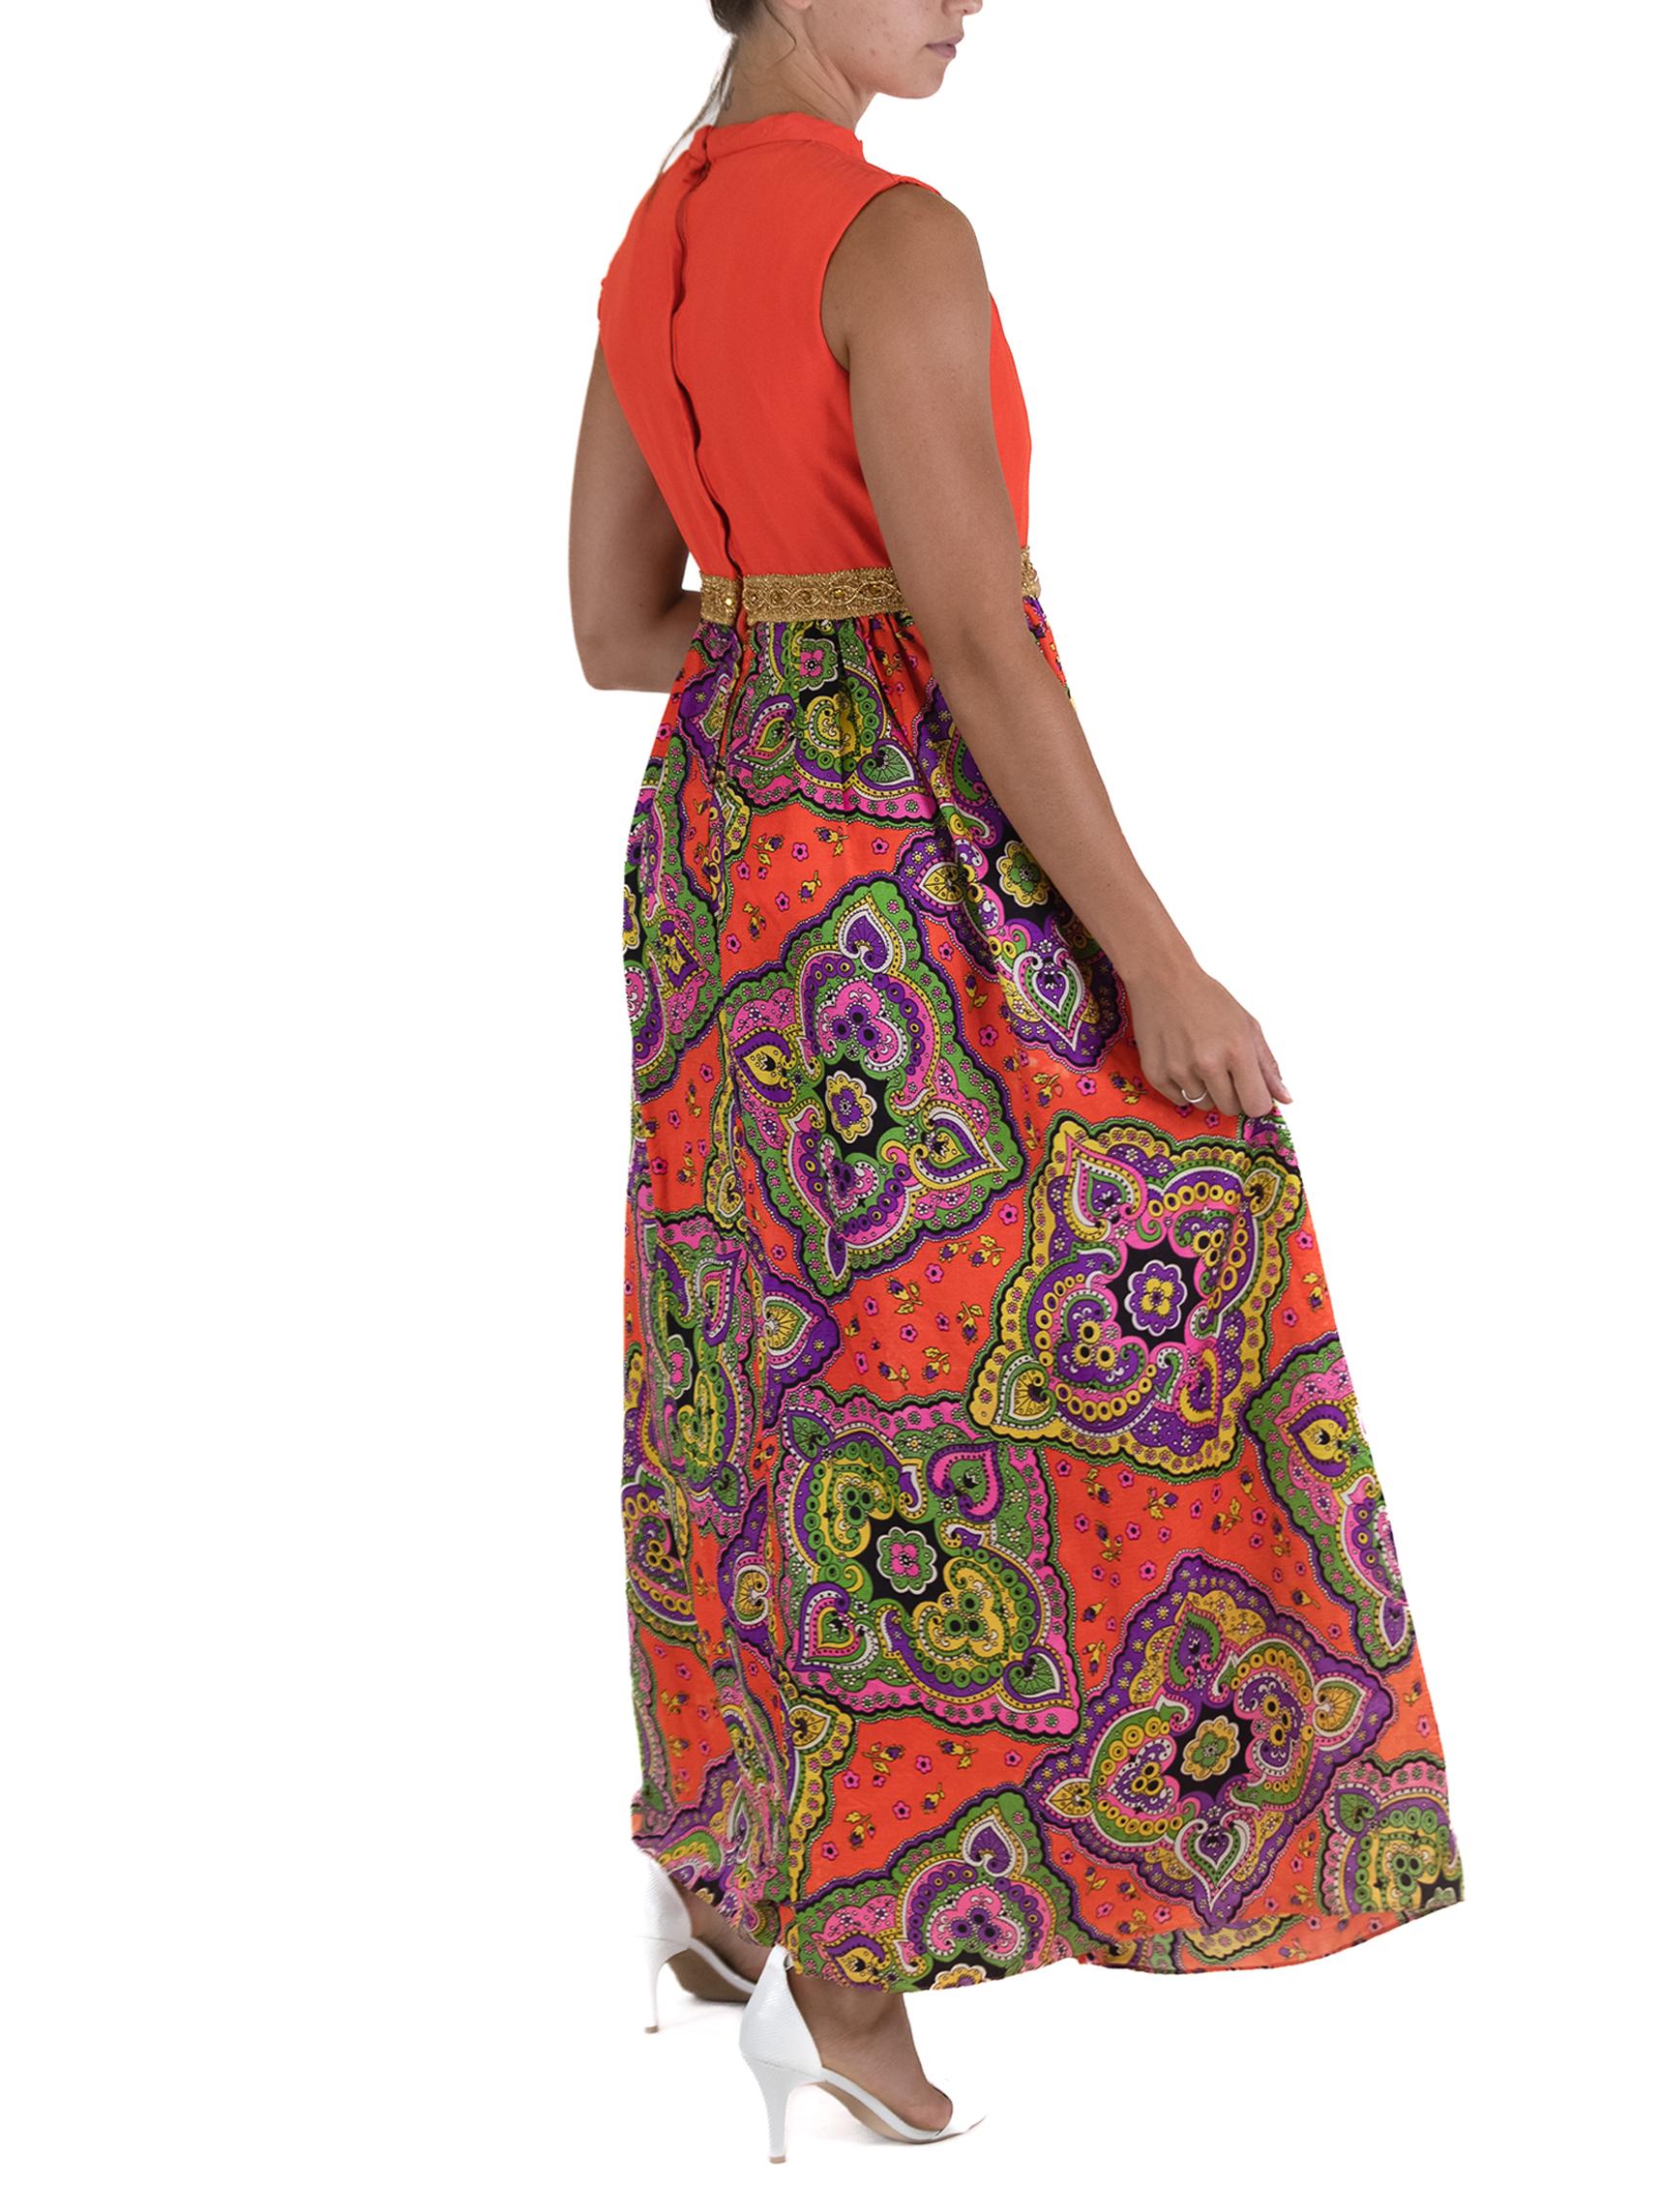 1970S Orange Psychedelic Paisley Print Dress With Keyhole Neck And Gold Braided For Sale 1